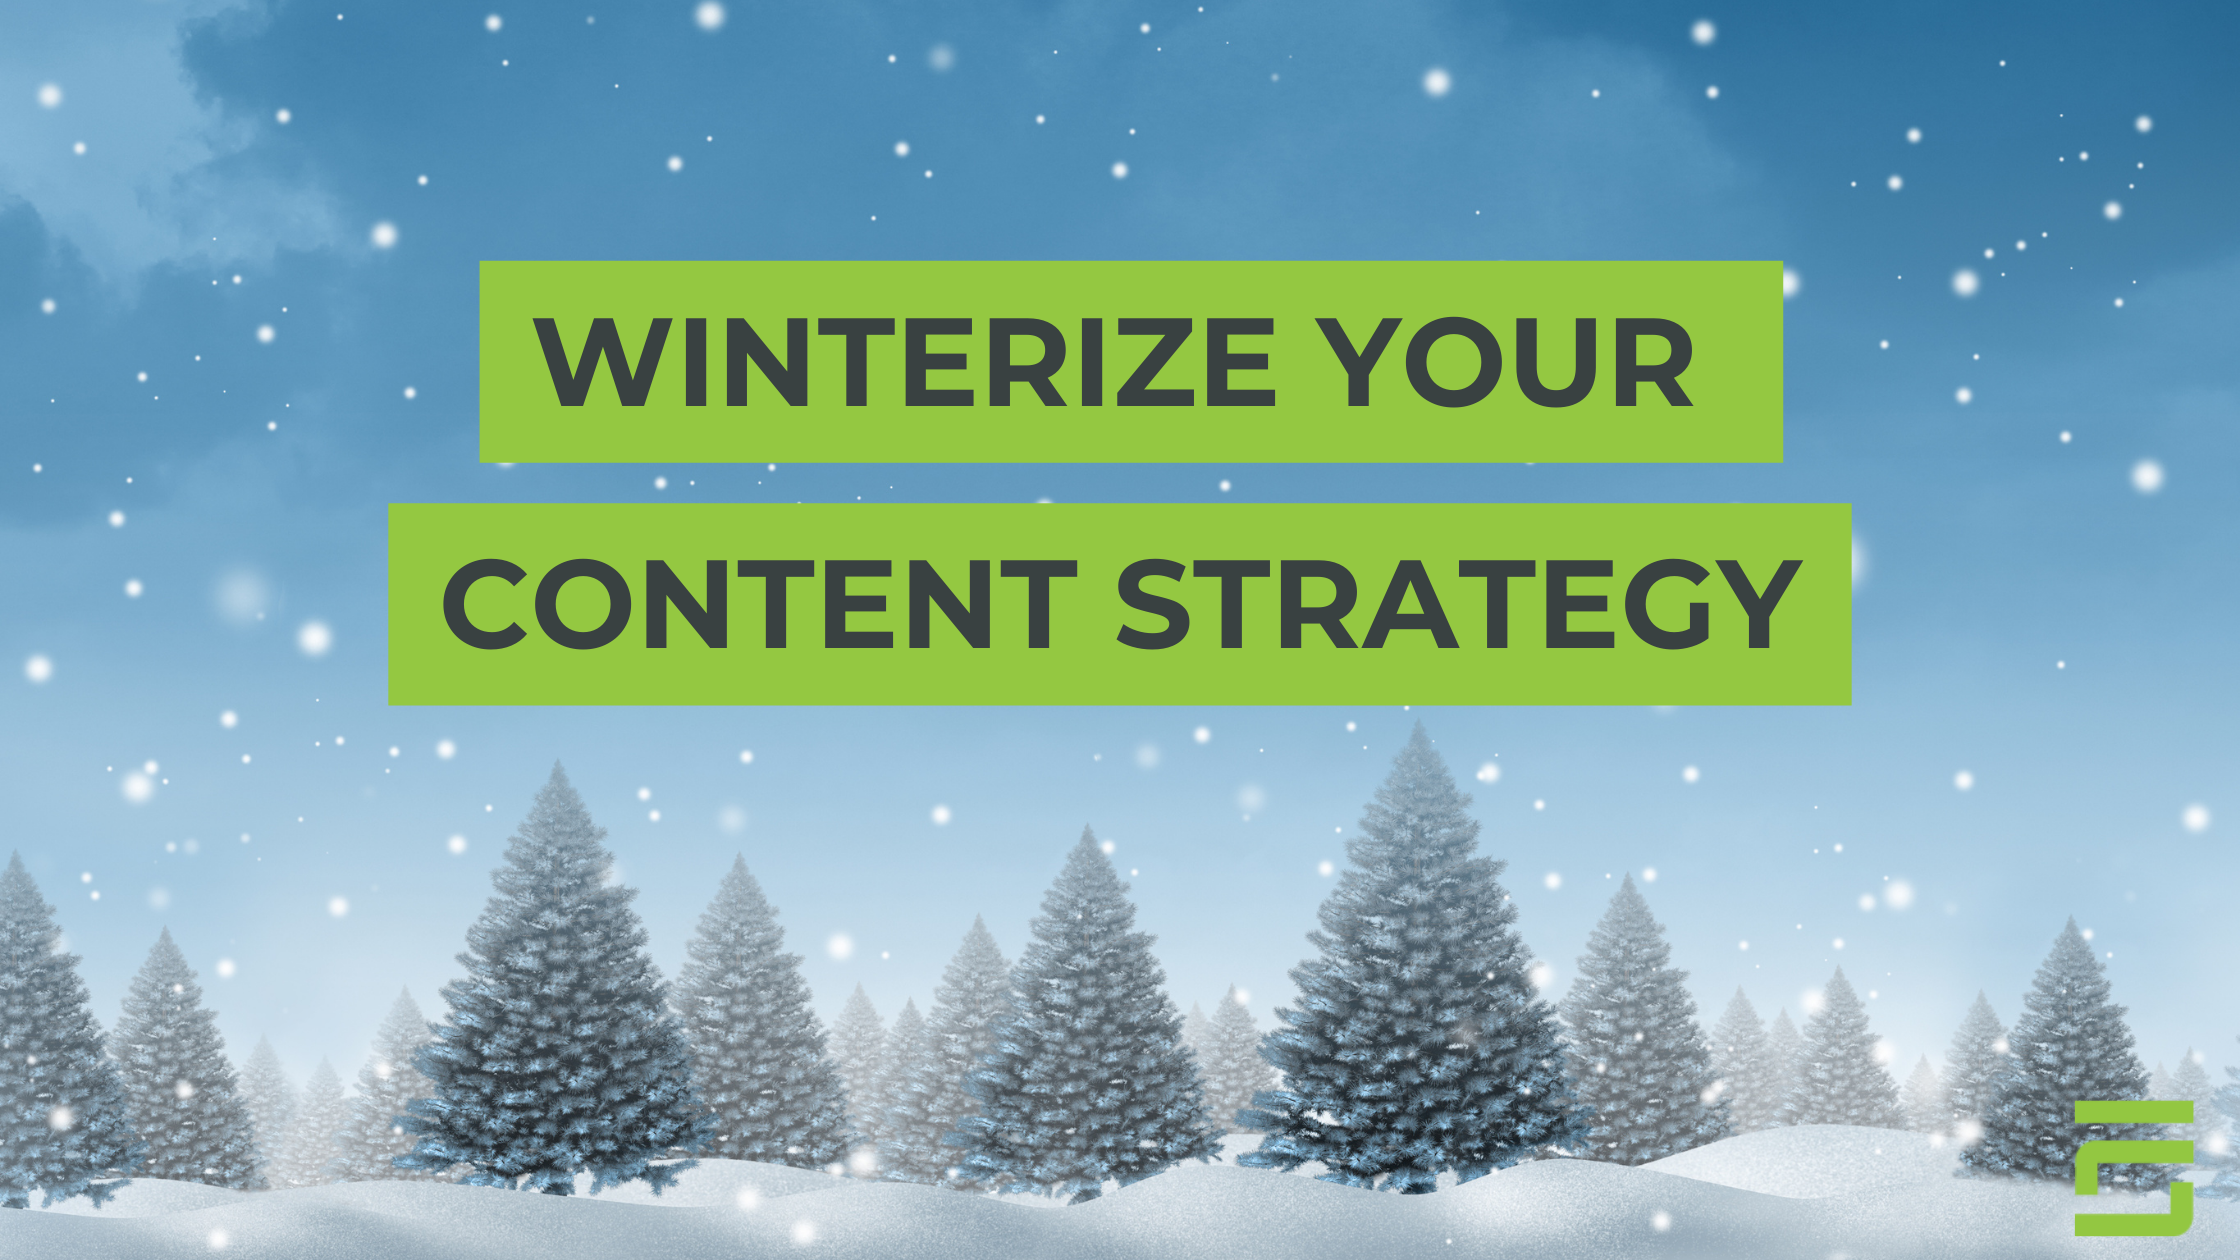 Winter Scene that says Winterize your content strategy